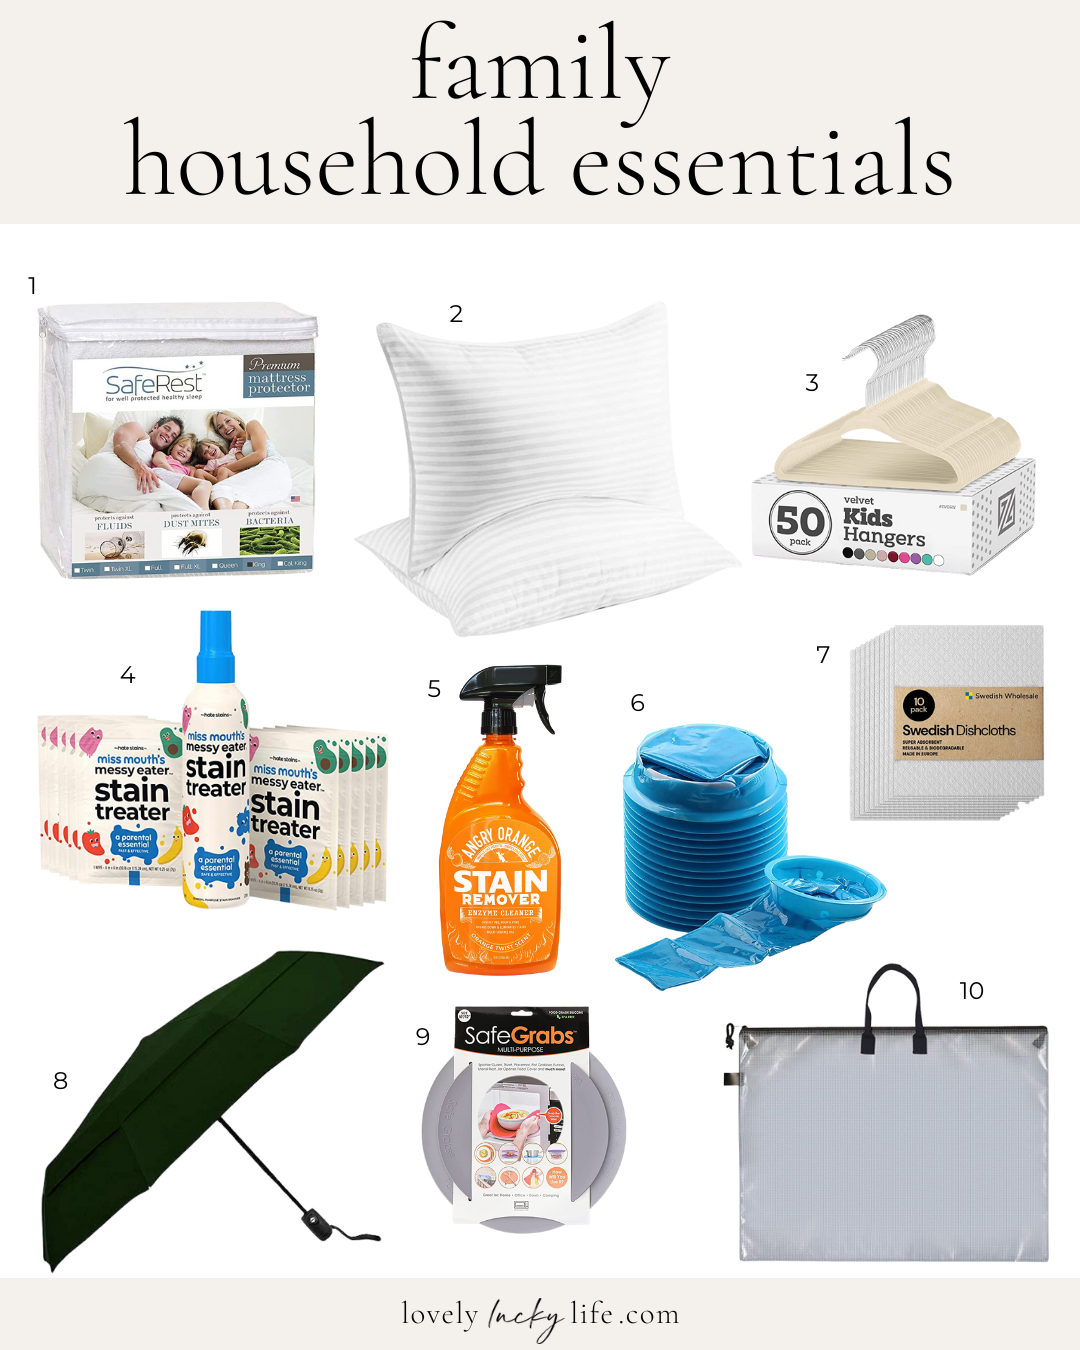 10 Non-Glam but Practical Household Essentials for the Fam